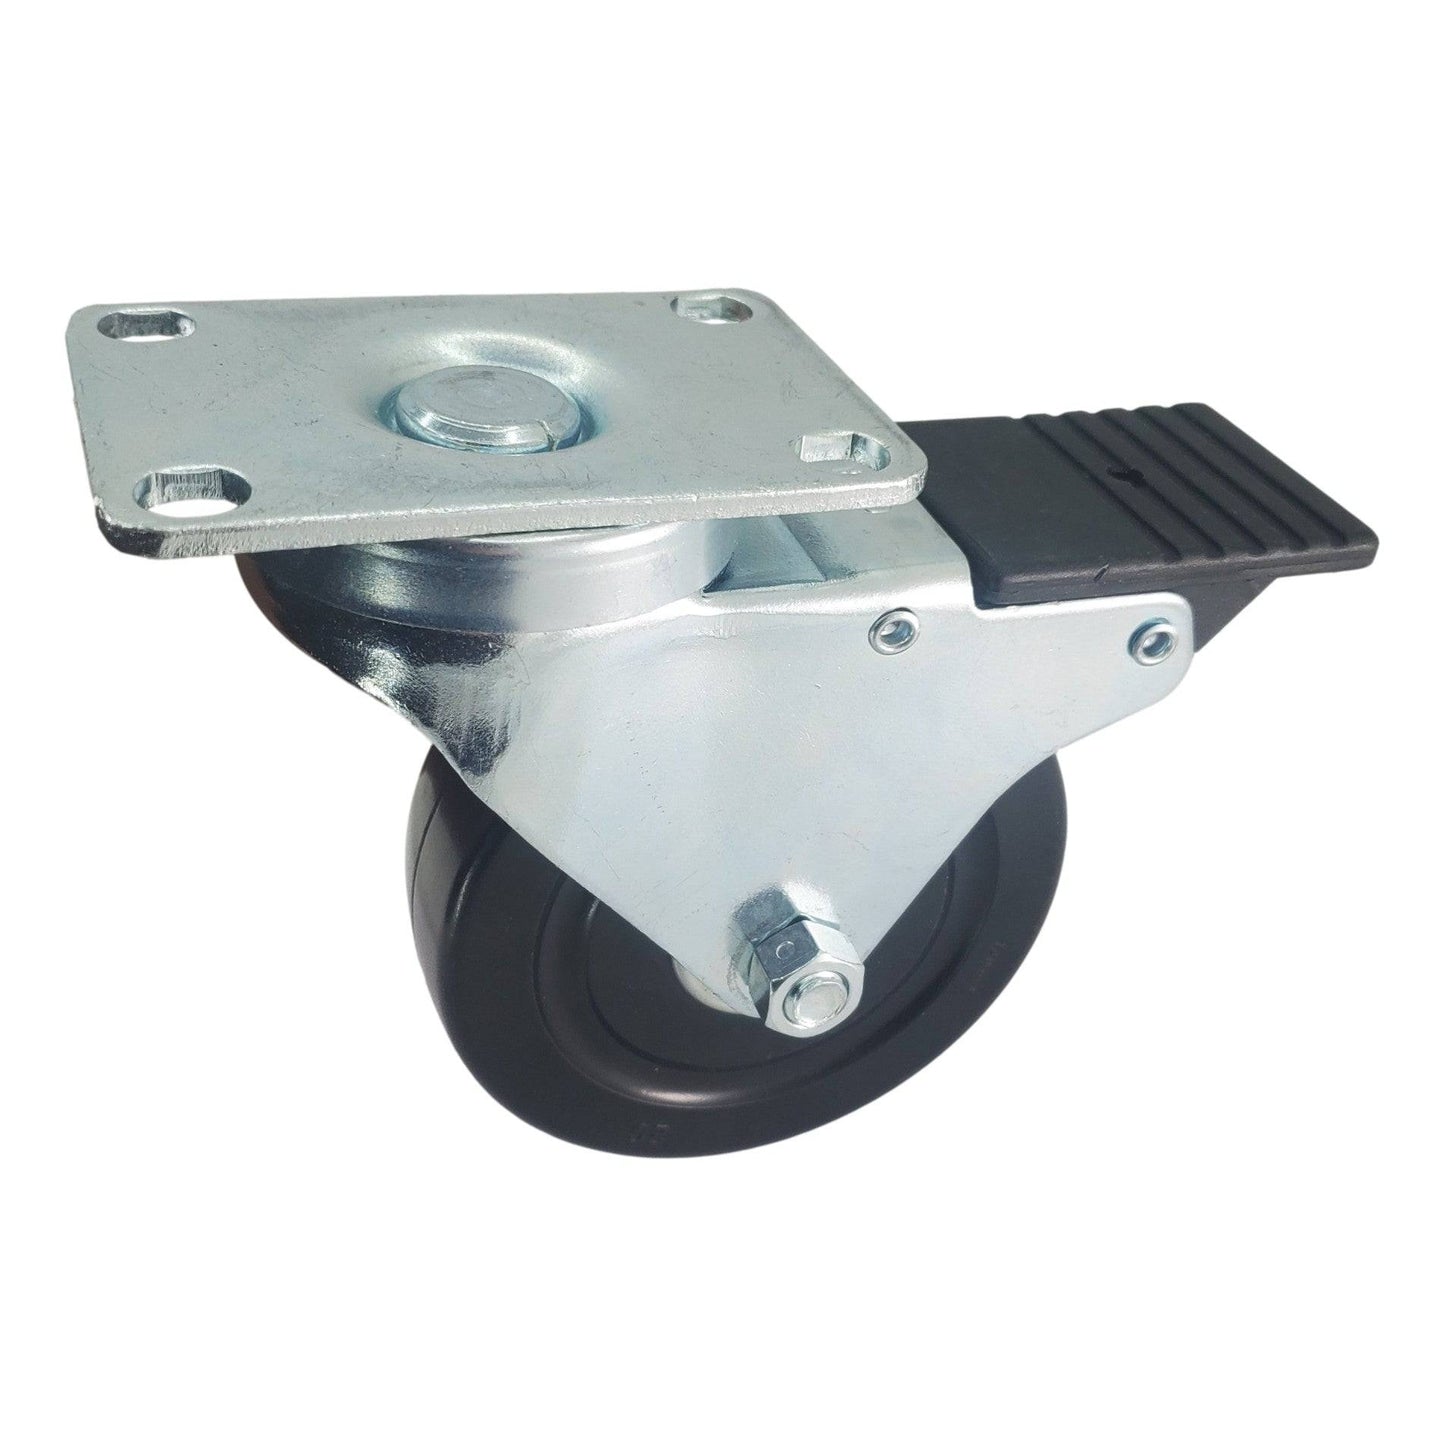 4" x 1-1/4" Soft Rubber Wheel Swivel Caster w/ Total Lock Brake - 350 lbs. Capacity - Durable Superior Casters